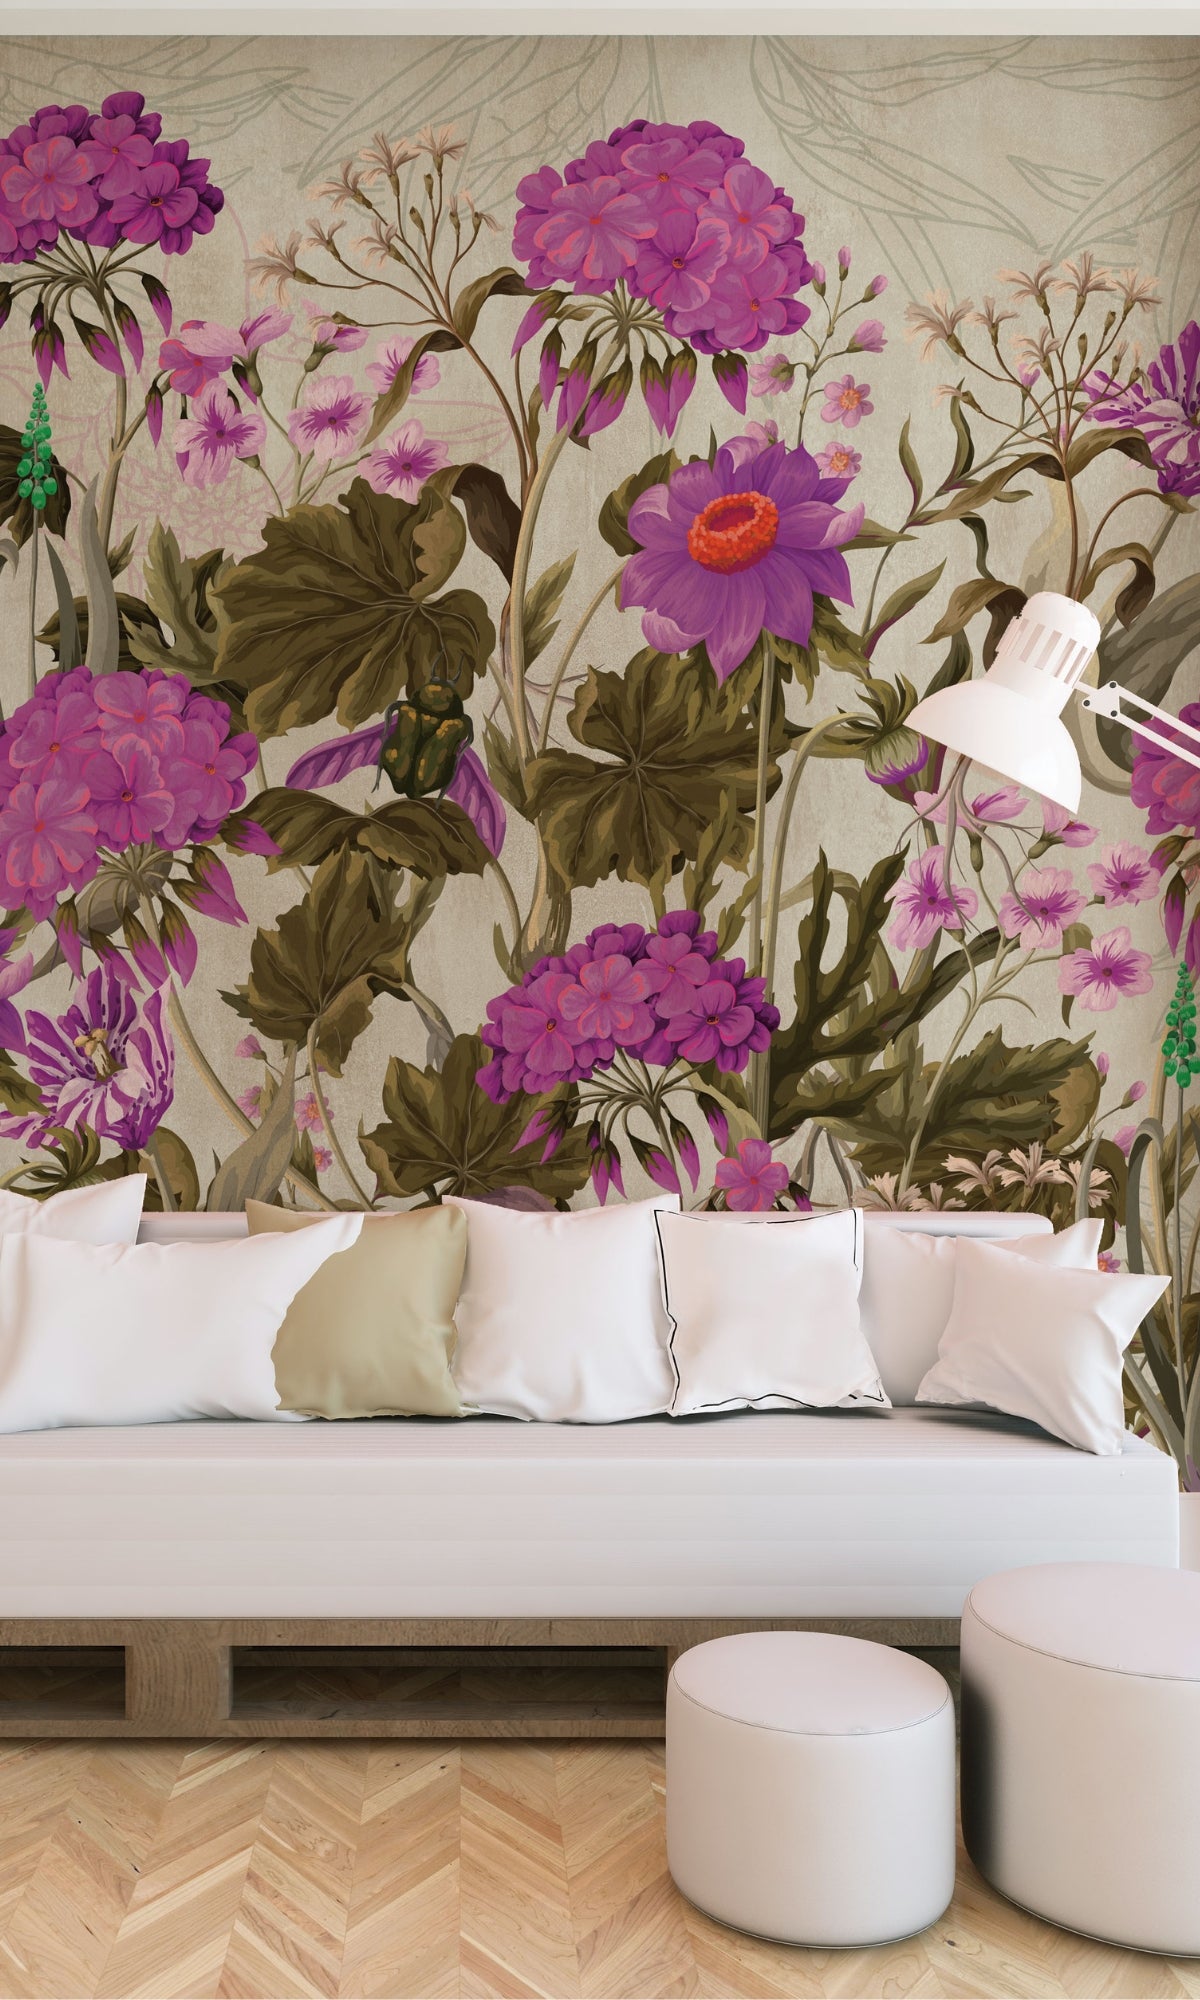 Colorful Geraniums and wild Flowers Mural Wallpaper M1414